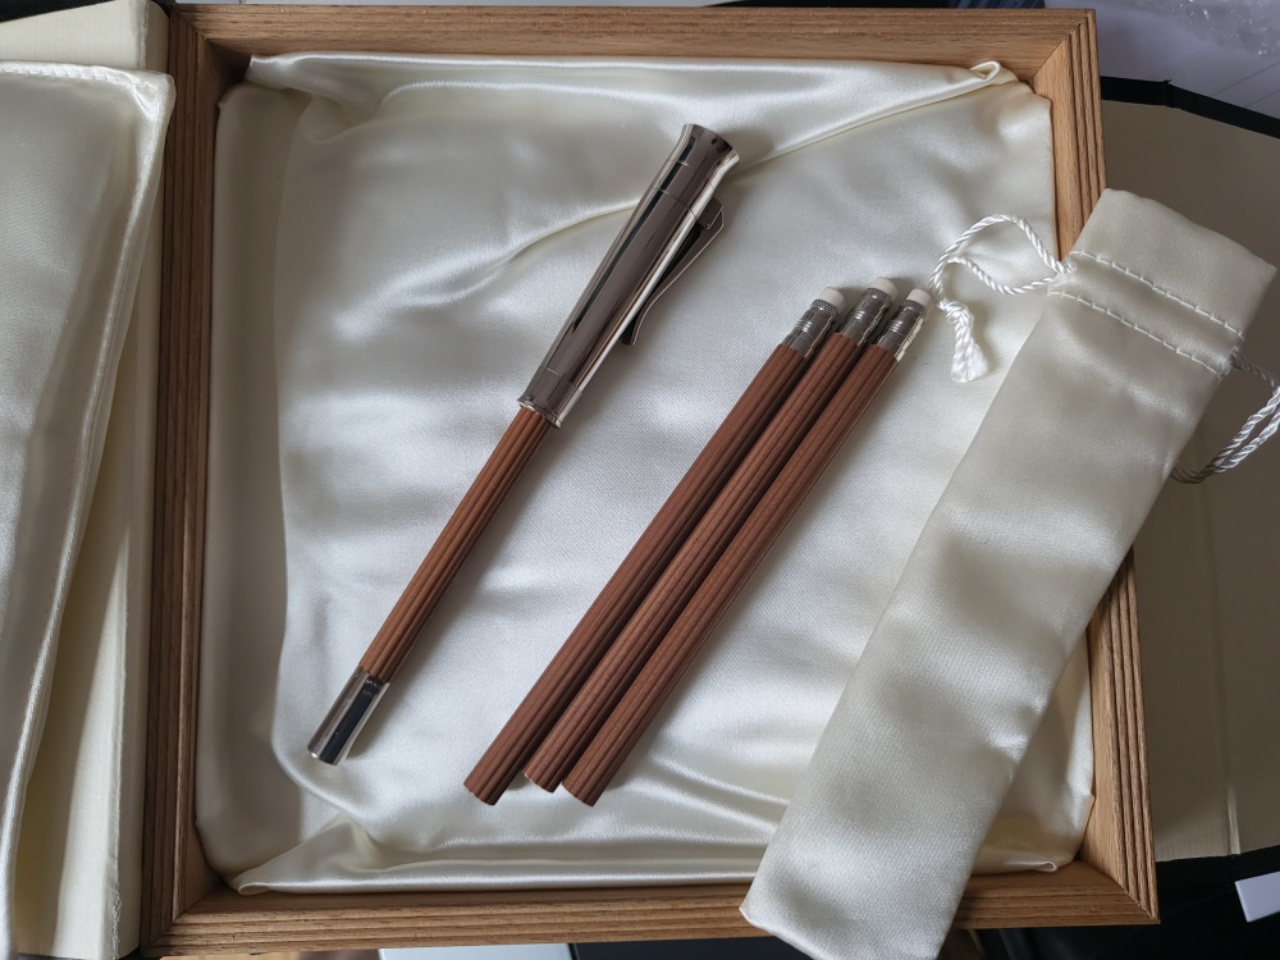 Pens and Pencils: : Faber Castell: Perfect Pencil White Gold Limited Edition